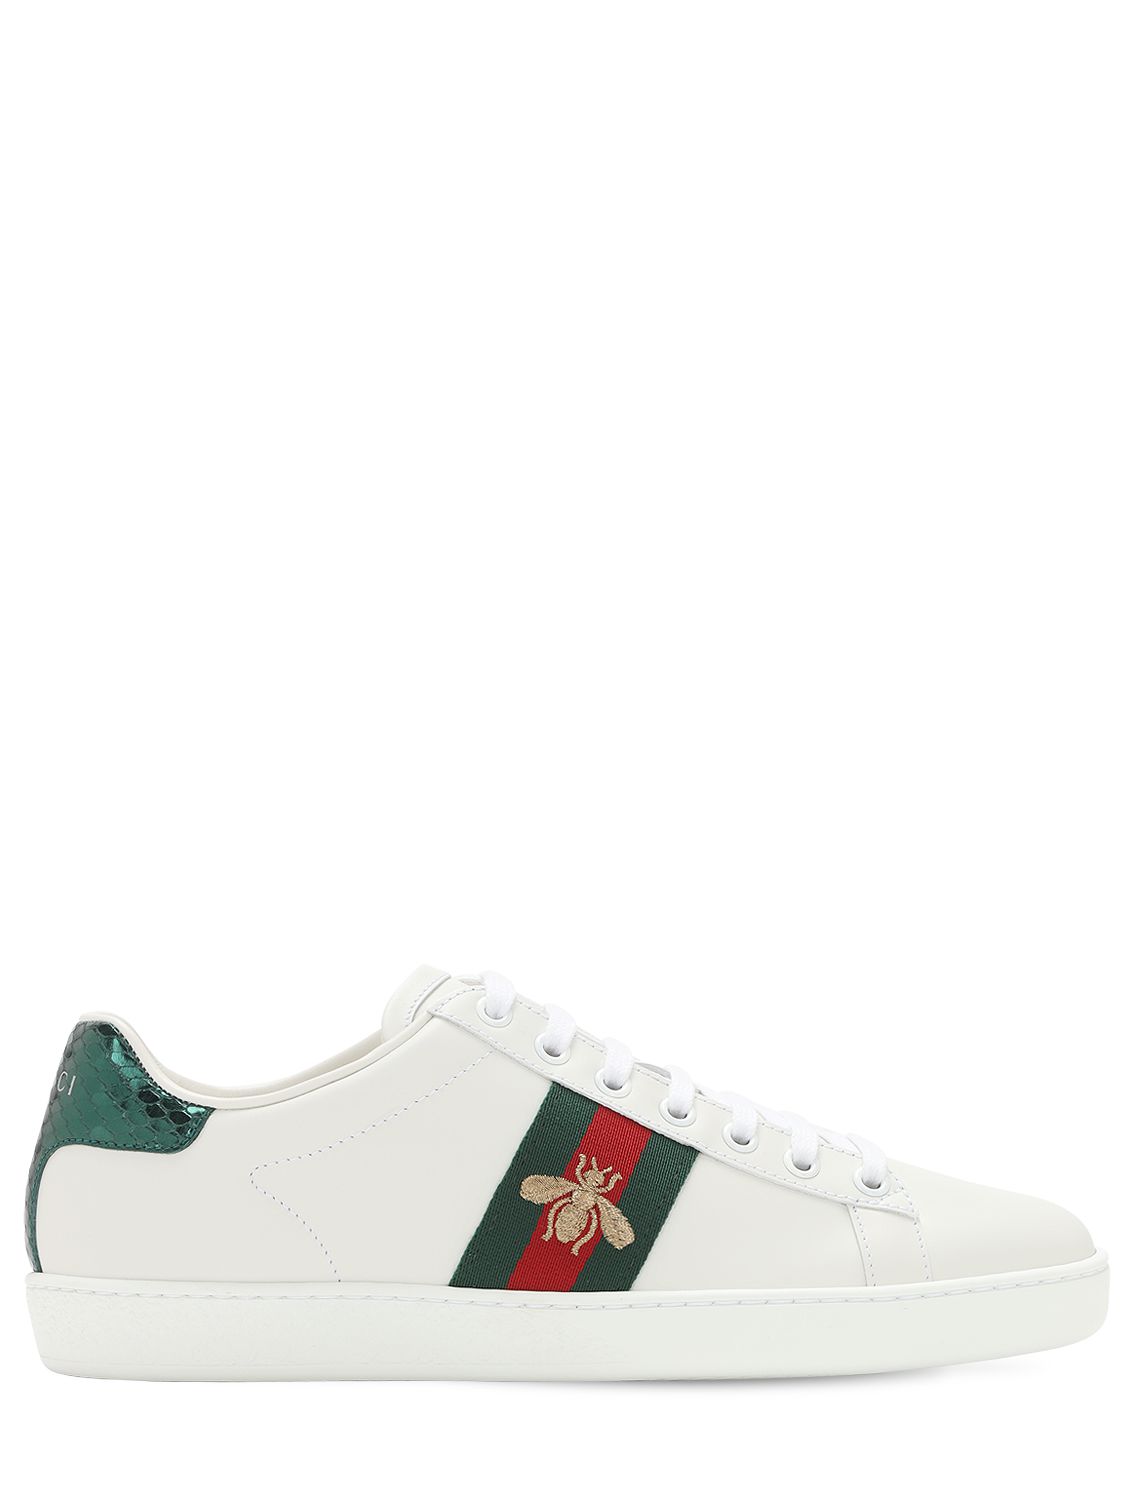 Mm New Ace Bee Leather Sneakers - GUCCI - Modalova